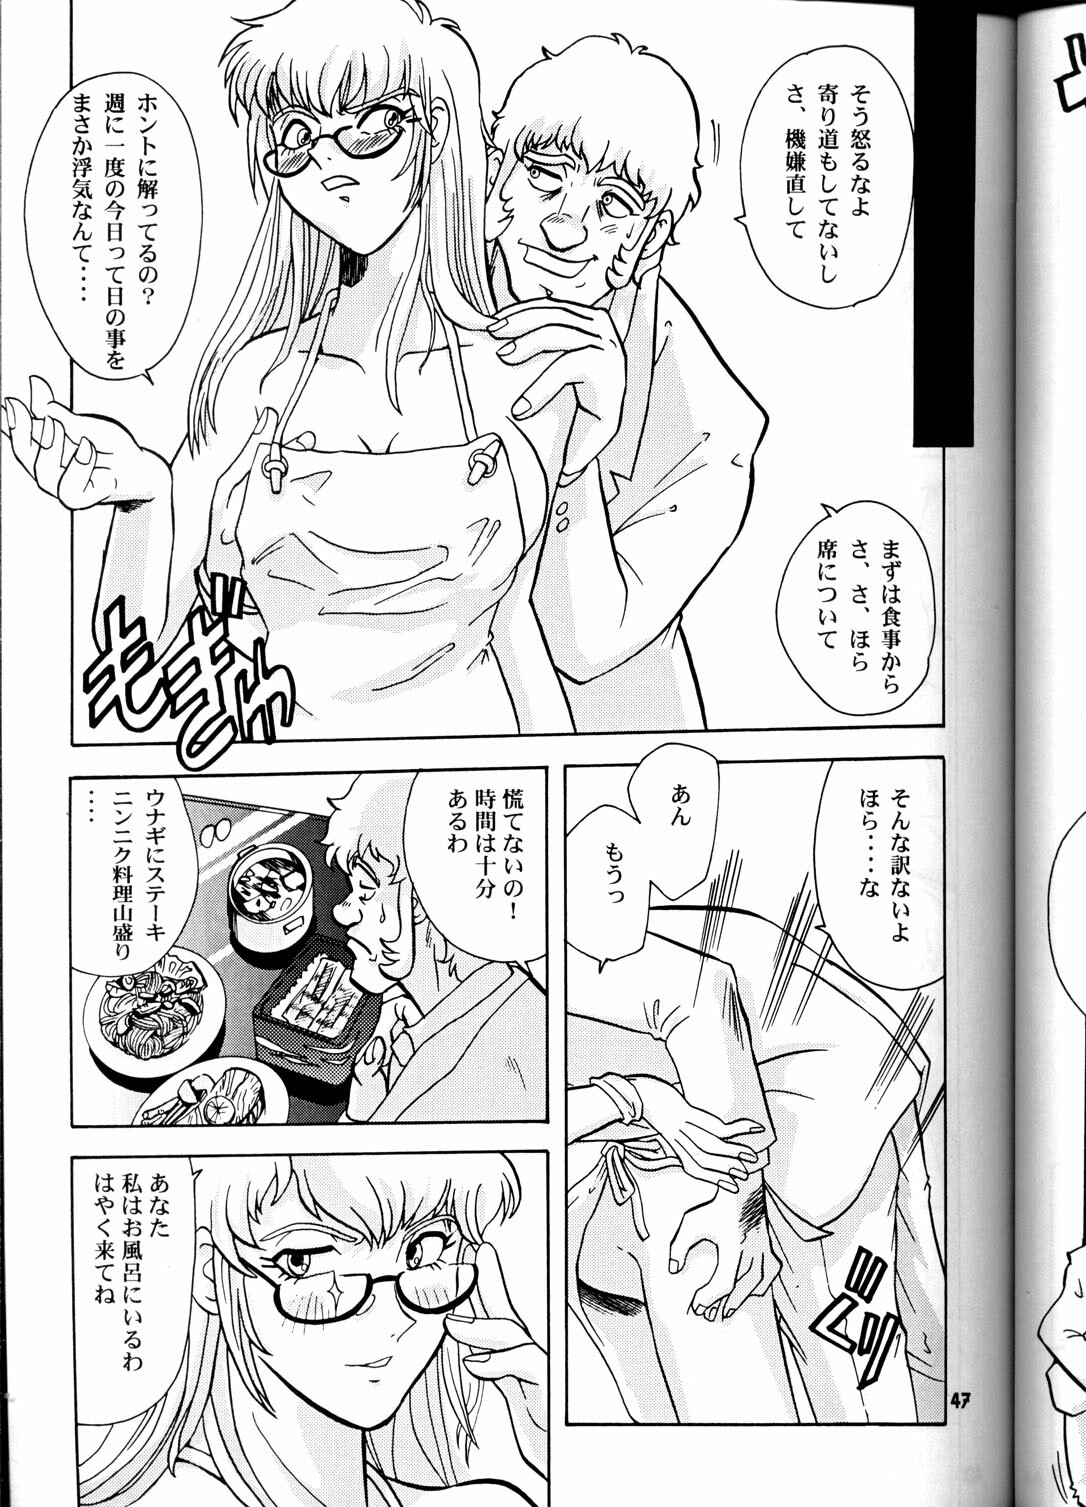 (C58) [T2 UNIT (Various)] OH! Robo Musume Chuushuugou! (Various) page 47 full